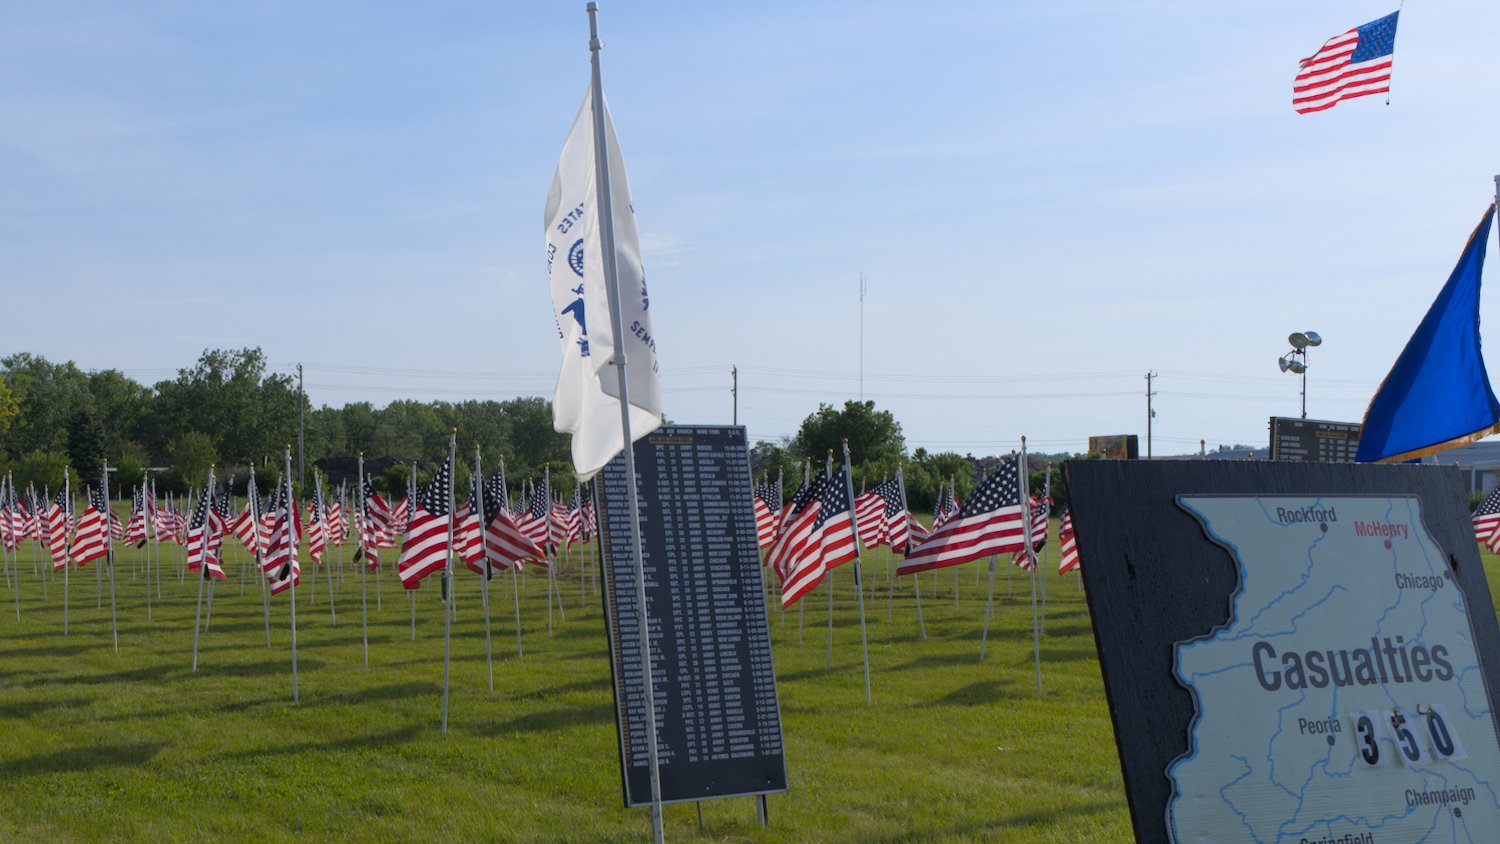 U.S. flags, fallen service member name boards, and location board for Illinois.